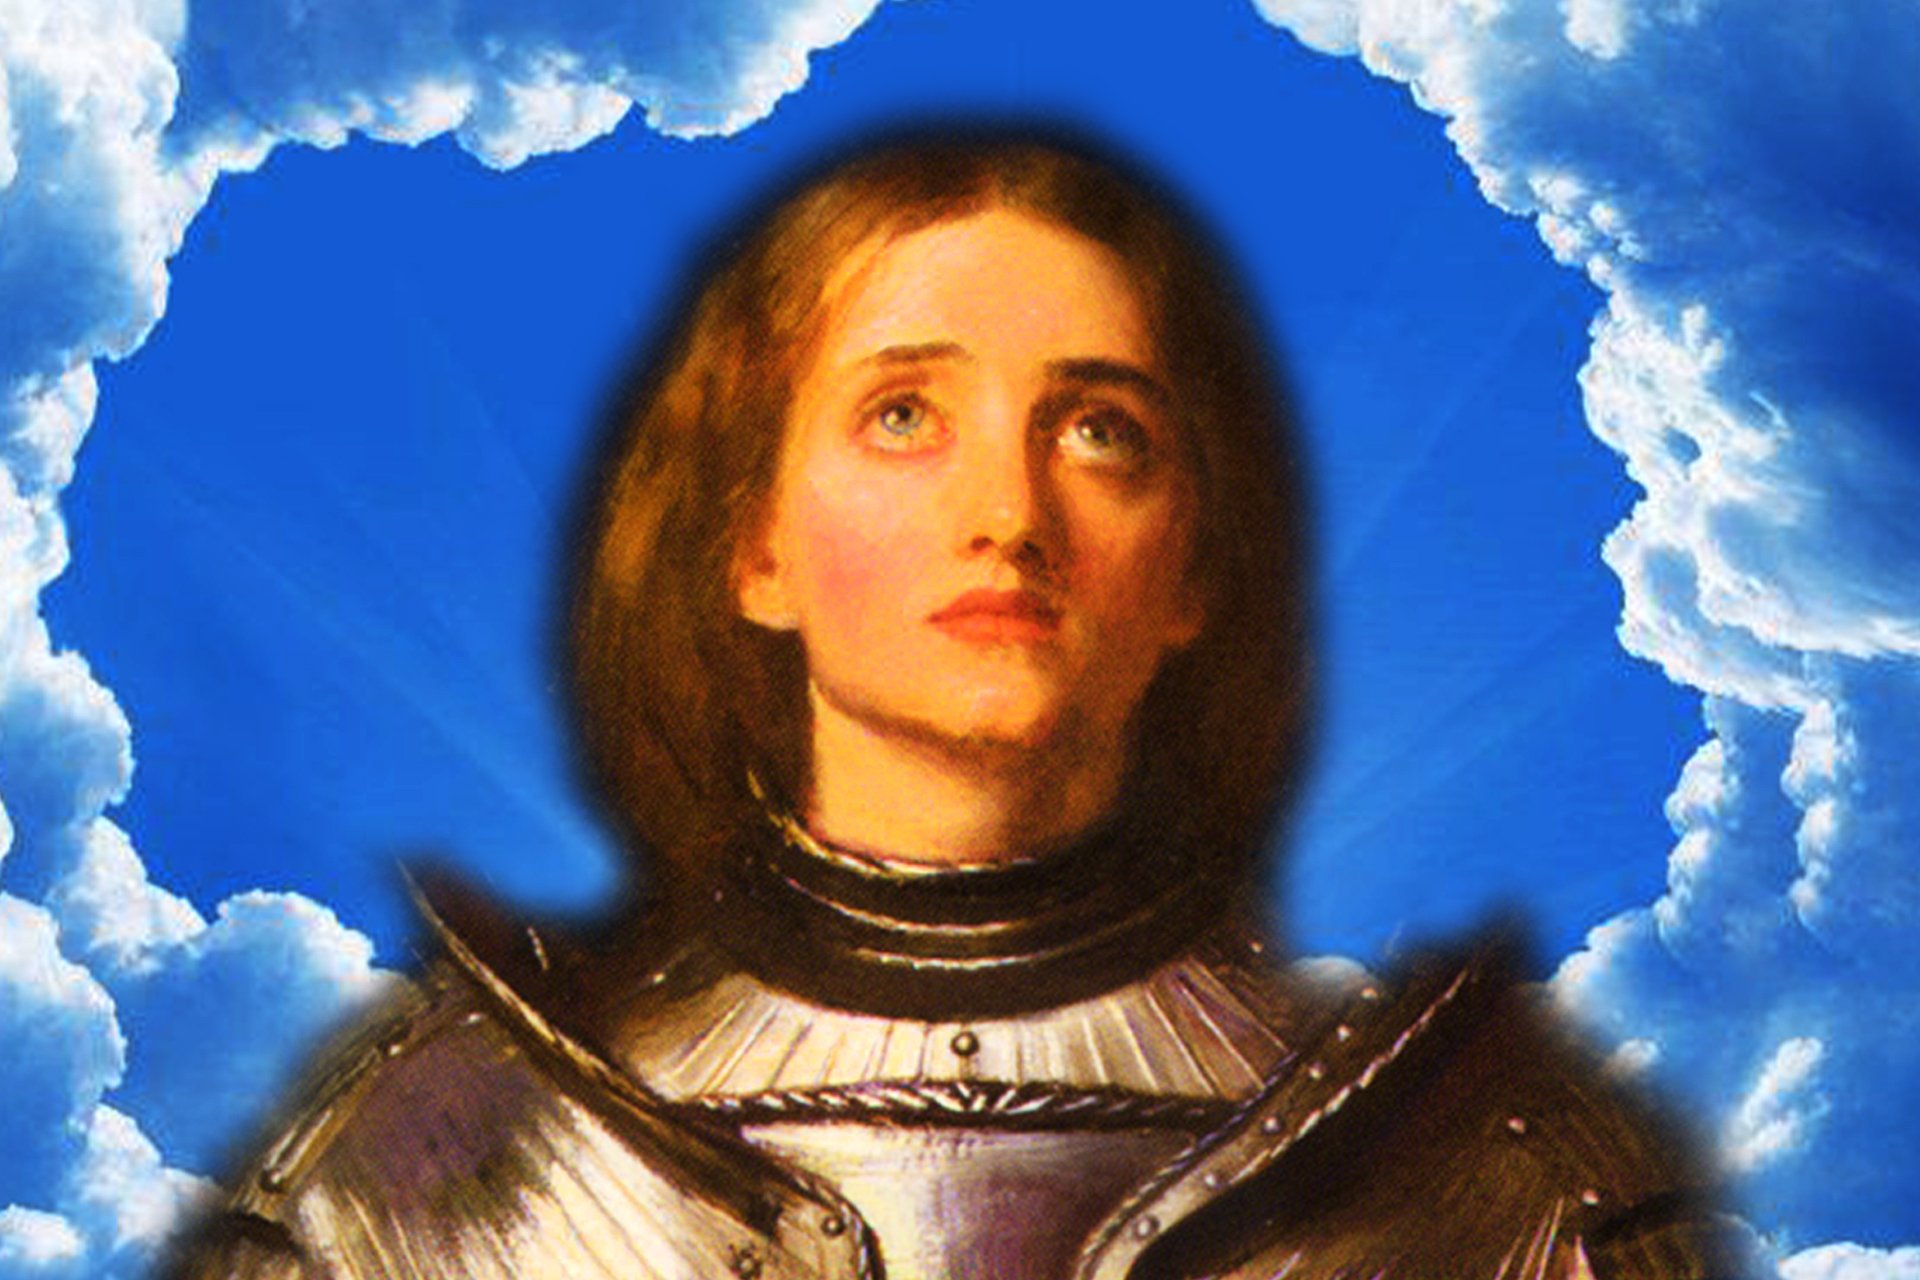 Joan of Arc in armor standing in front of a blue sky with clouds. The clouds form a circle around her head.